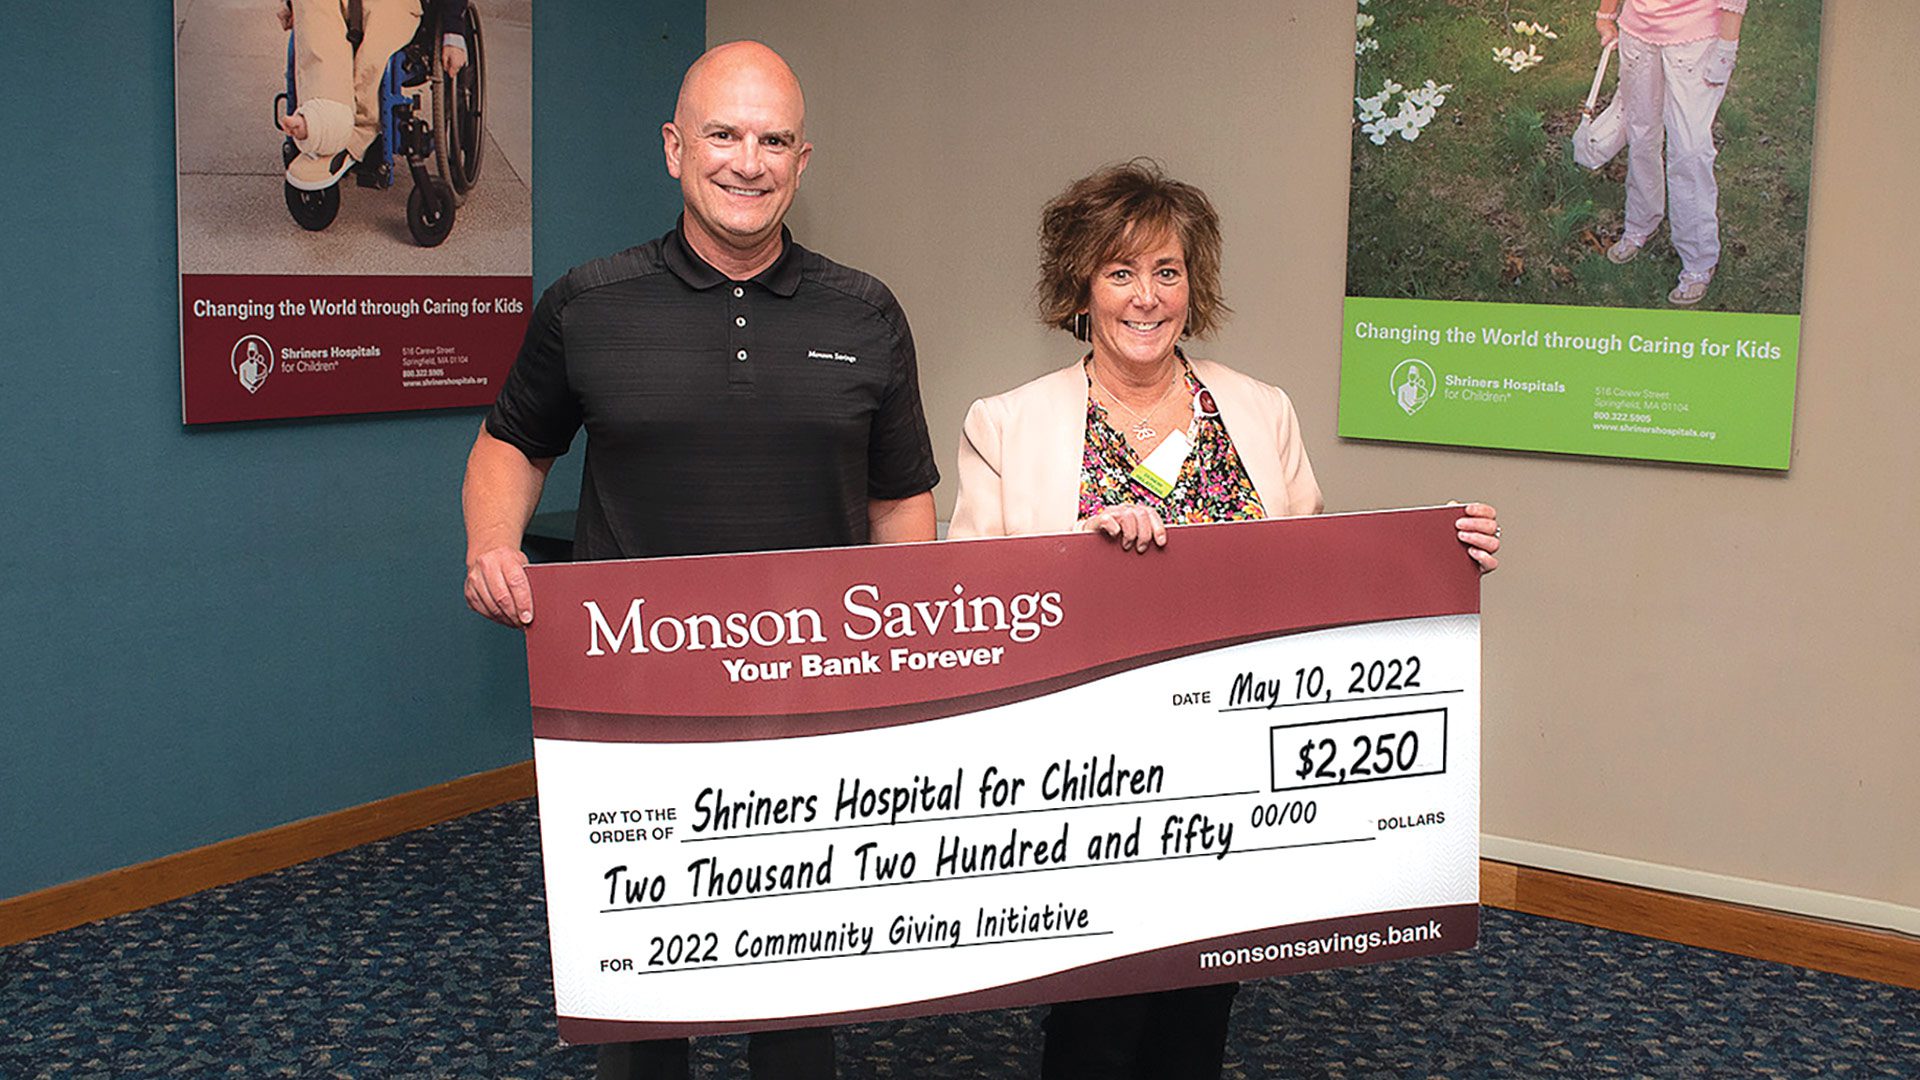 Bank President and CEO Dan Moriarty recently visited Shriners Children’s Hospital in Springfield to present Stacey Perlmutter, the hospital’s director of Development, with a $2,250 donation, part of the bank’s Community Giving Initiative.